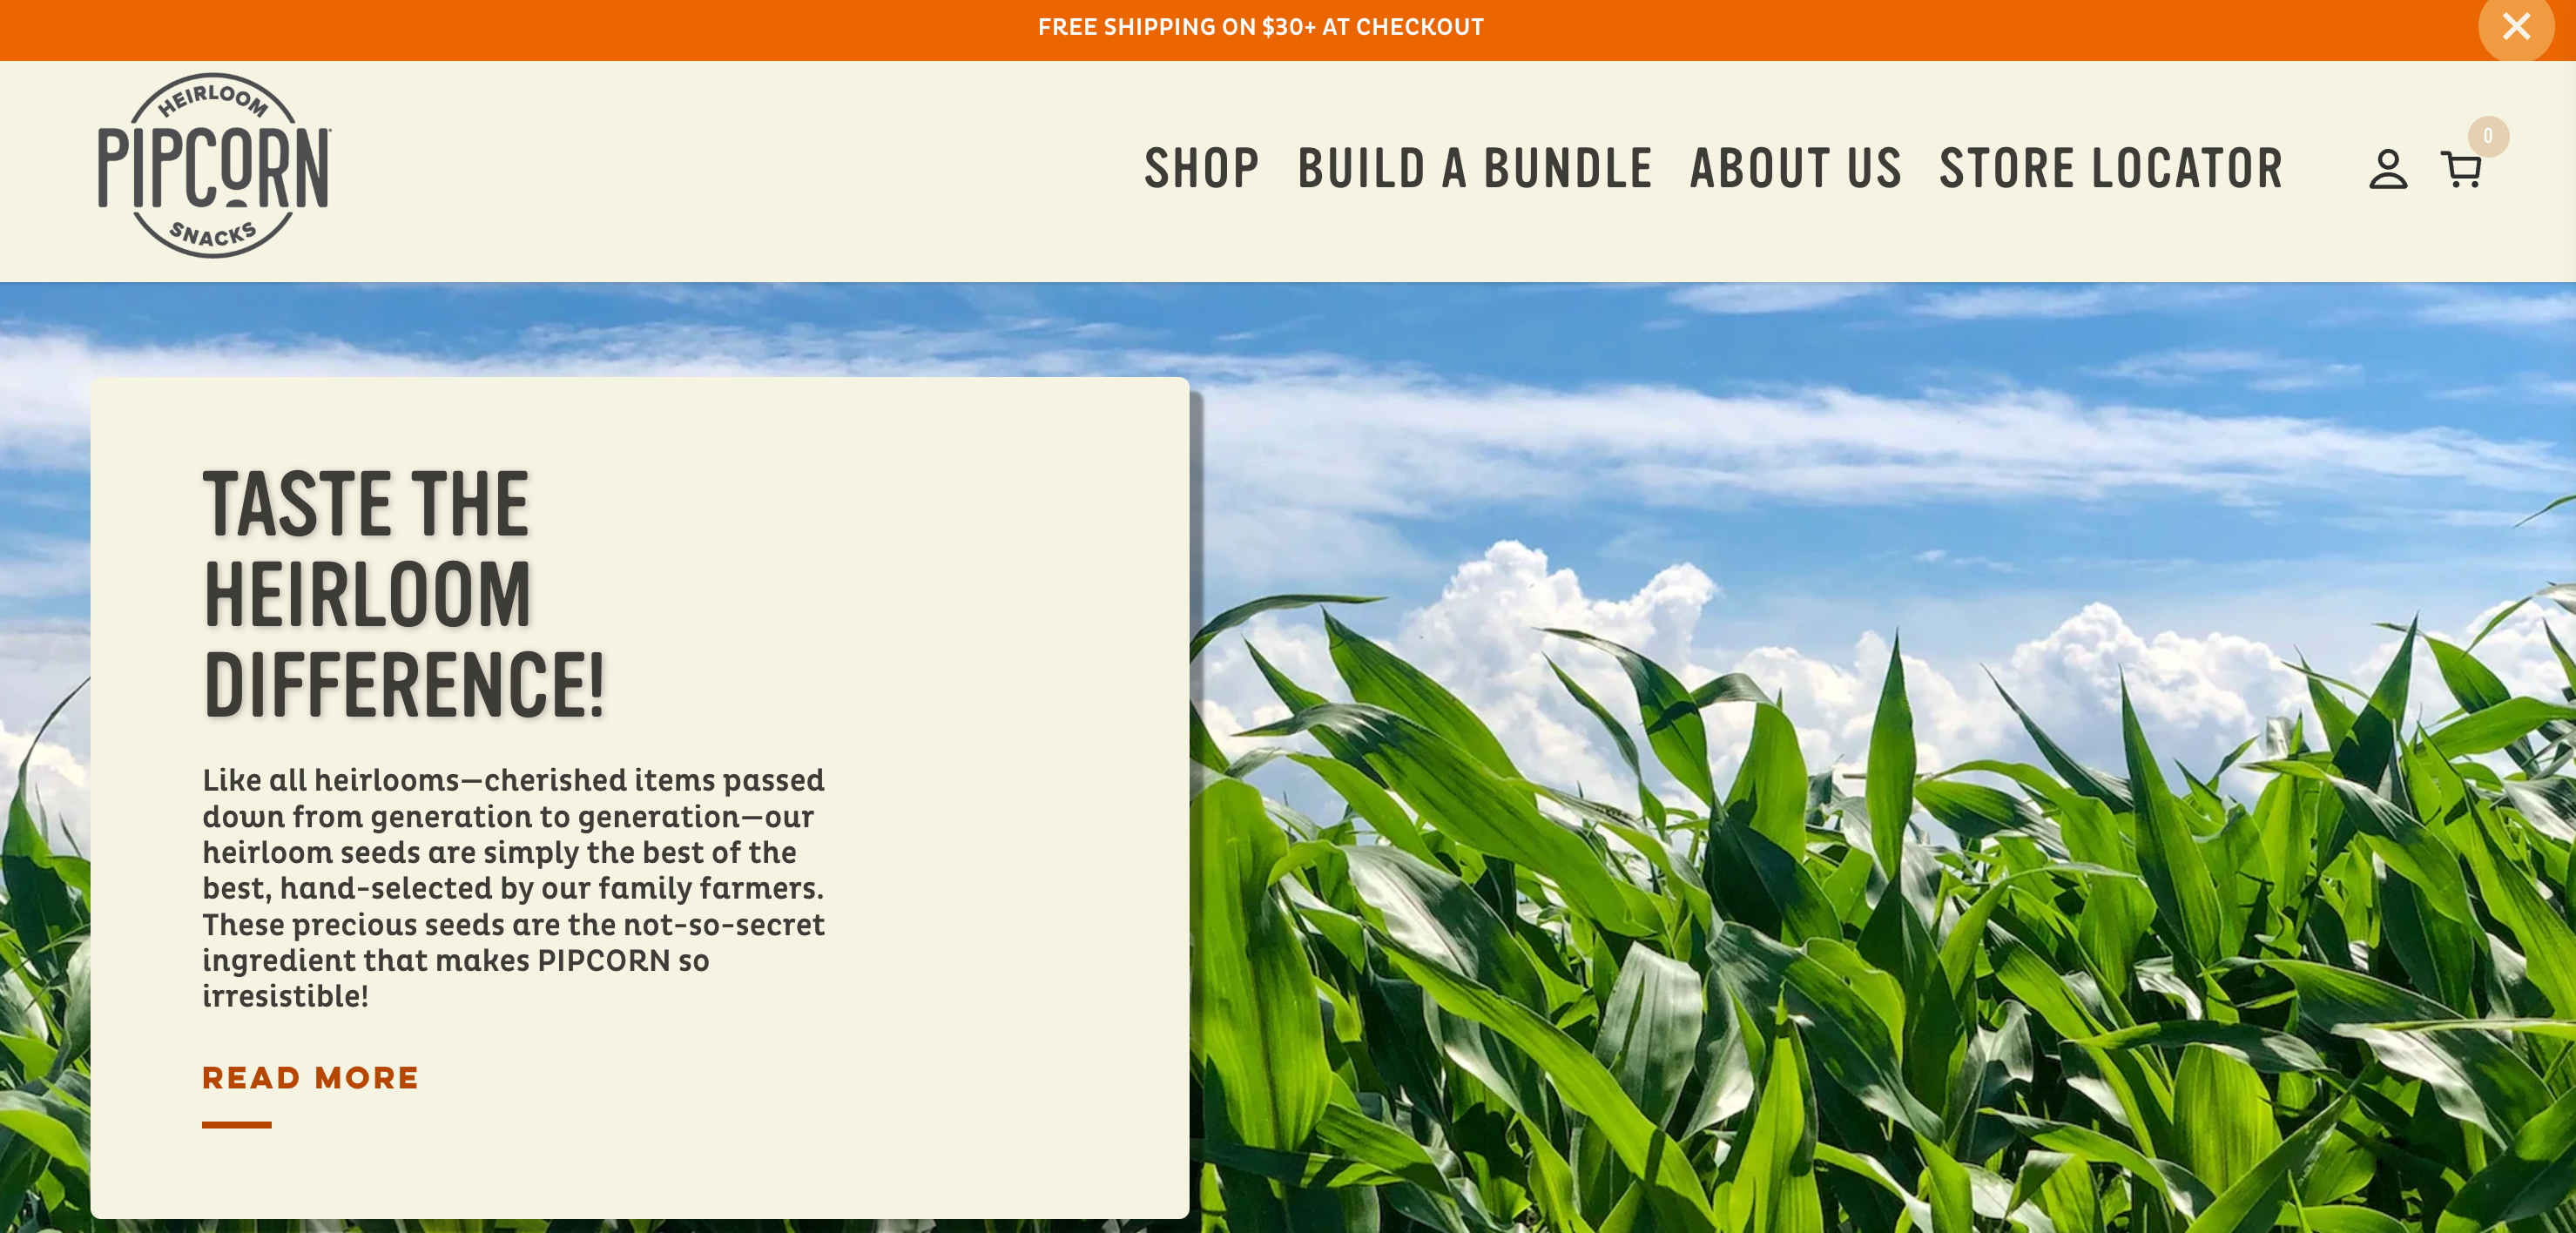 Ecommerce homepage for snack brand Pipcorn